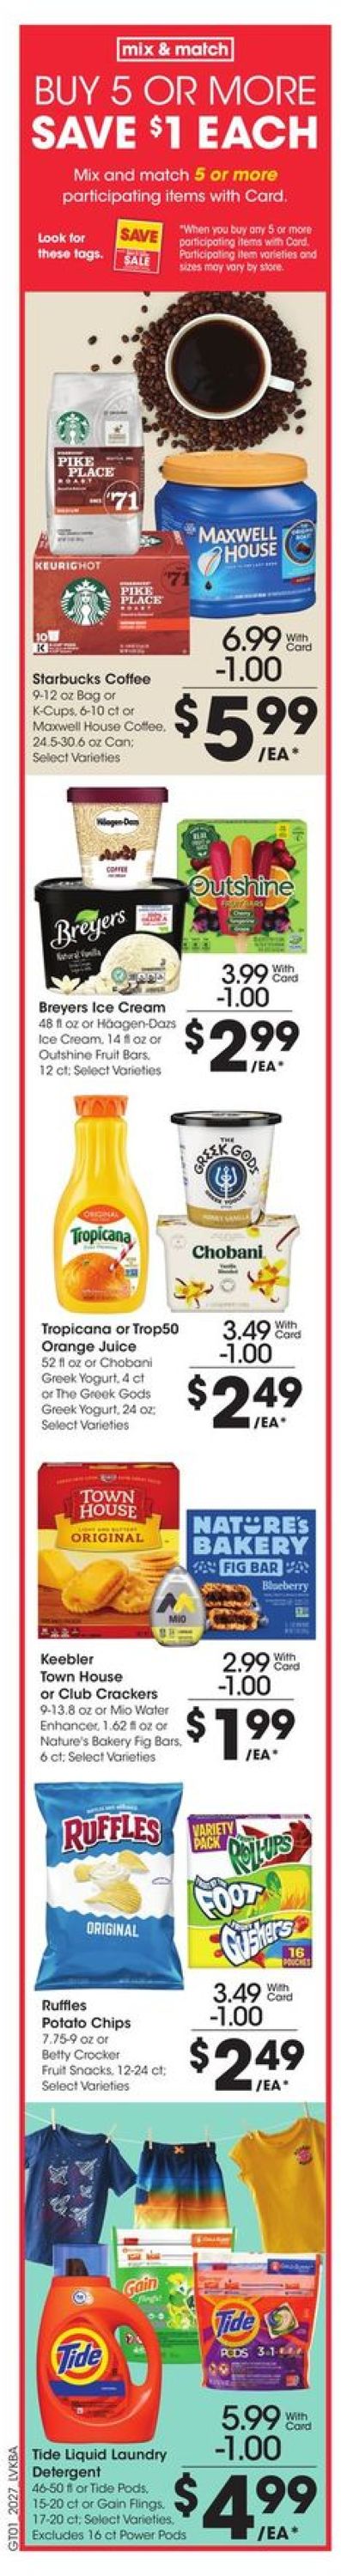 Jay C Food Stores Current weekly ad 08/05 - 08/11/2020 [3 ...